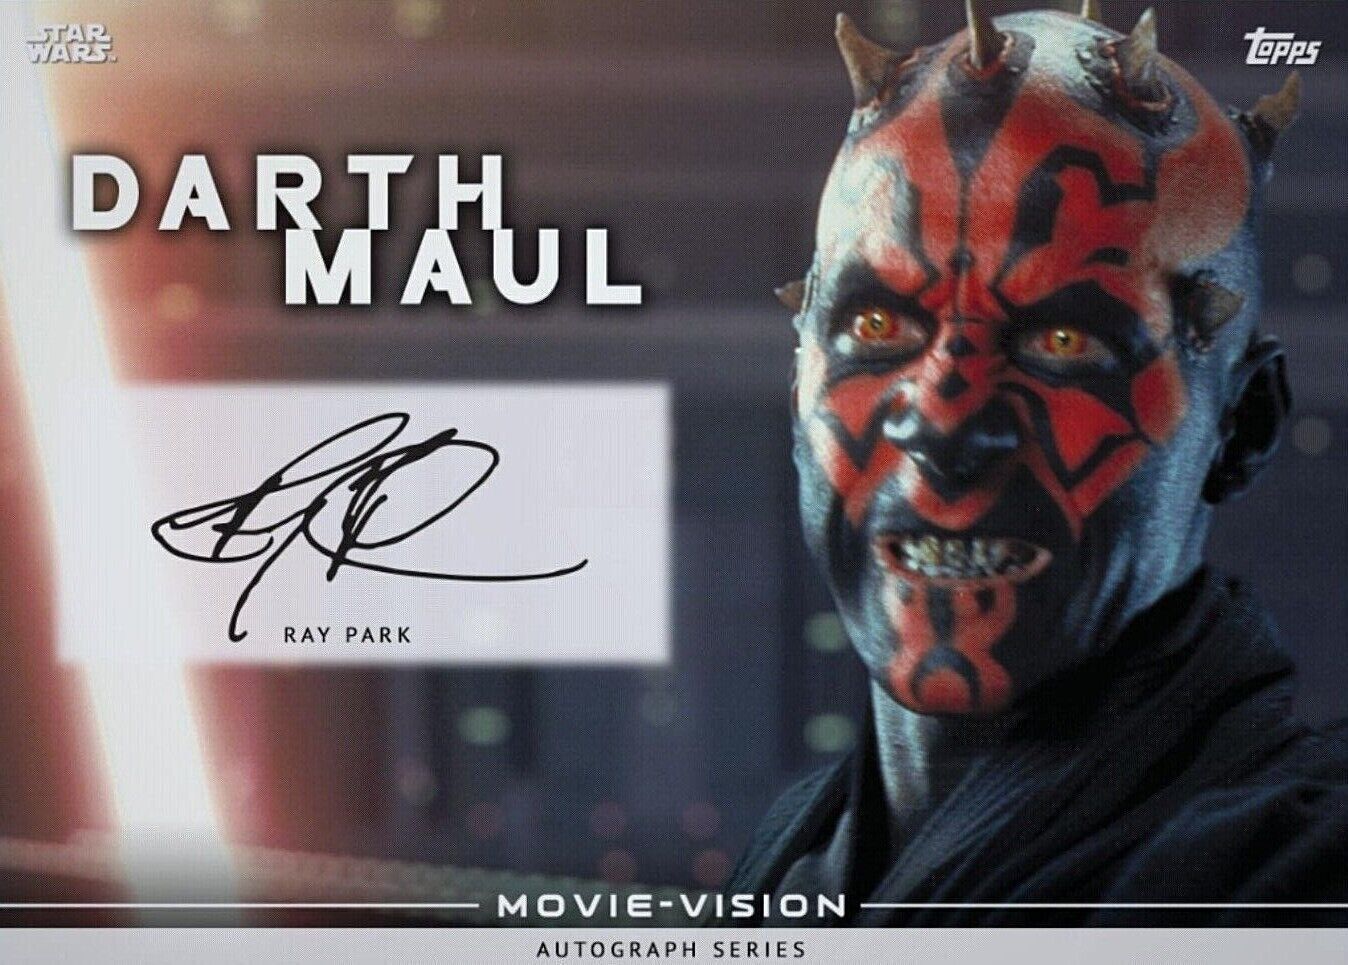 Topps Star Wars RAY PARK Authentic Autograph as DARTH MAUL SIG RARE Digital Card